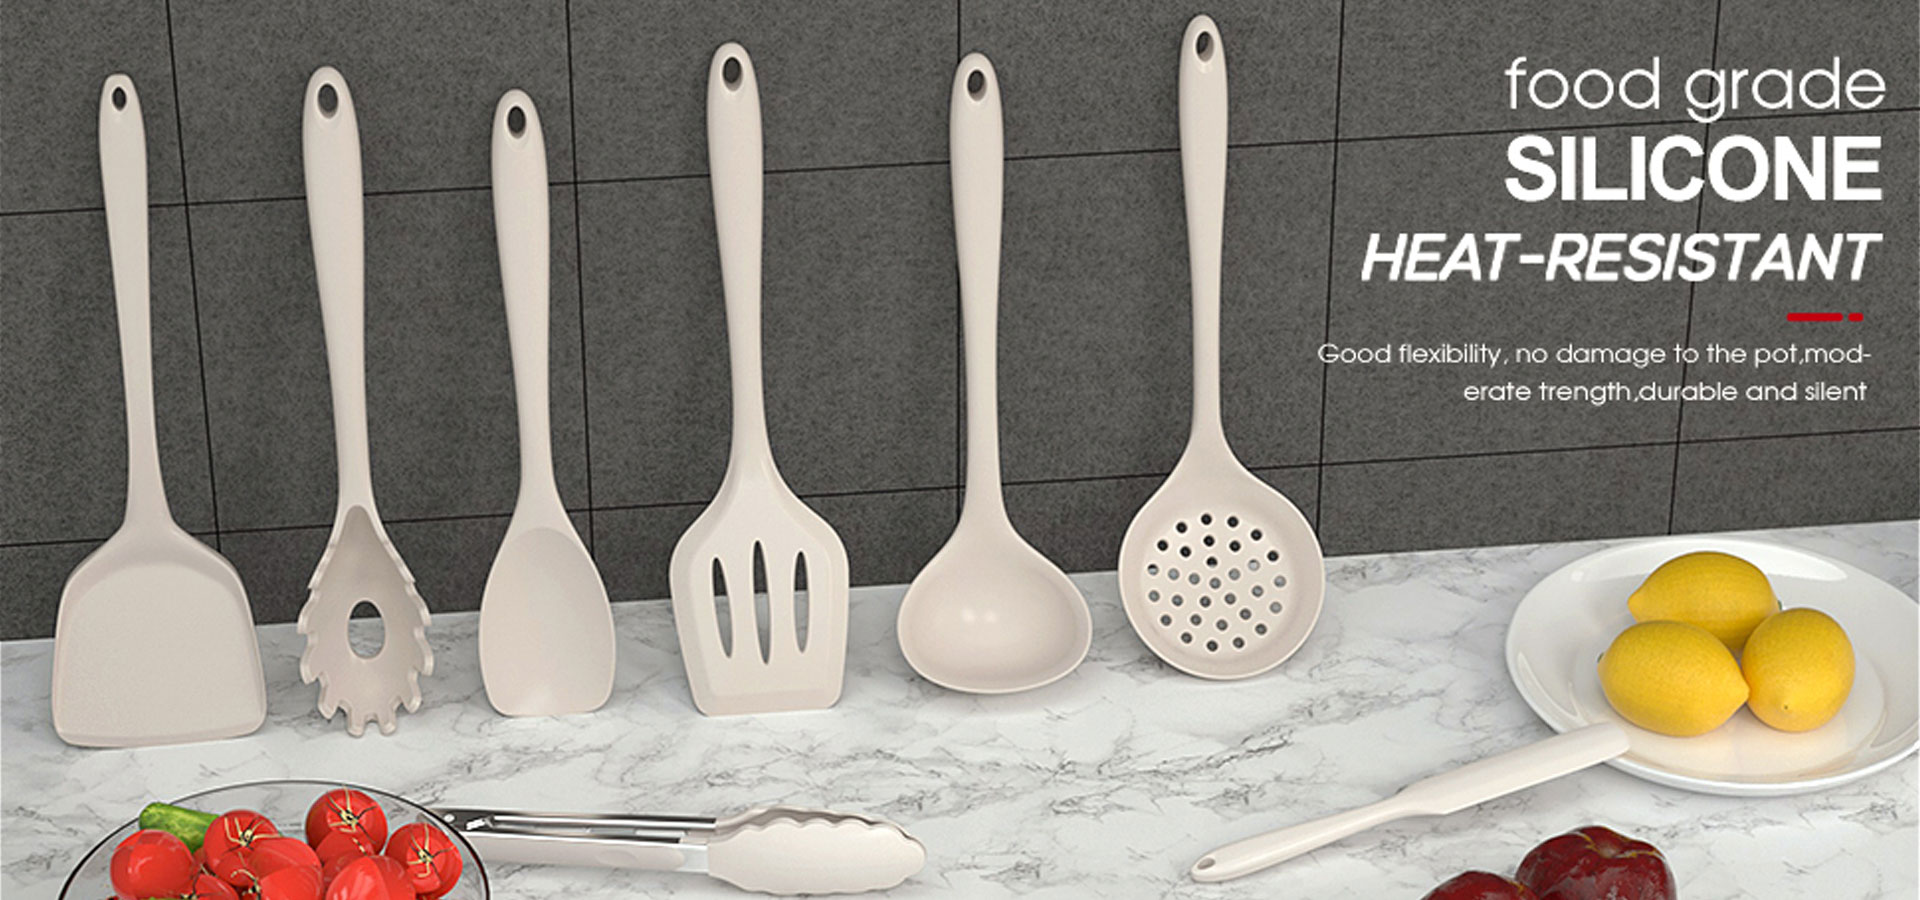 AOTHOD Silicone Cooking Utensils Sets